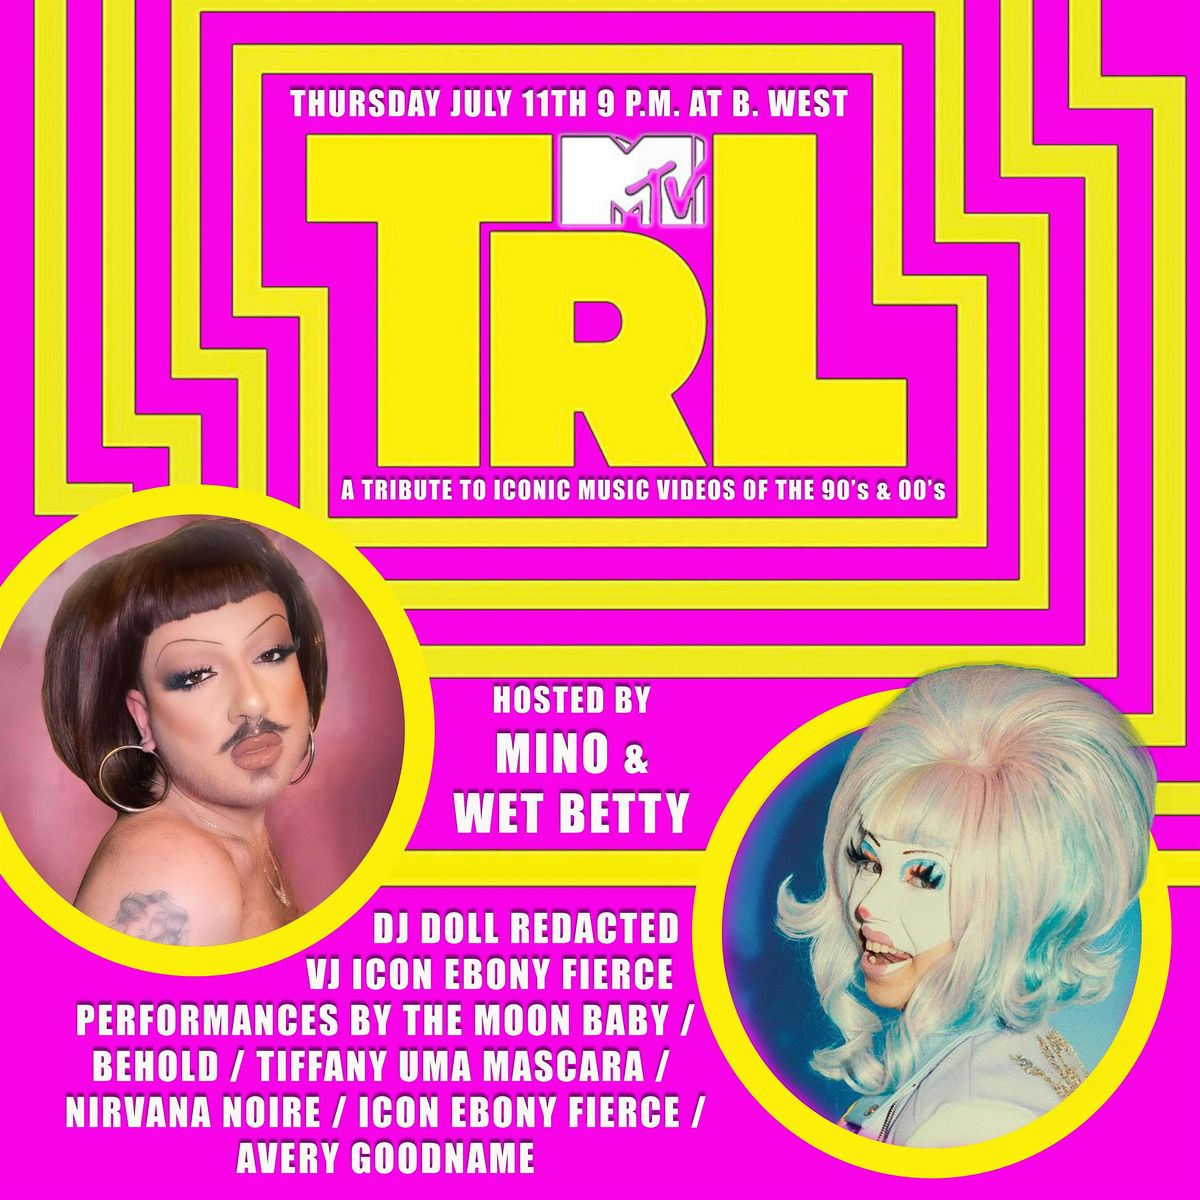 TRL: A Tribute to Iconic Music Videos of the 90's and 00's